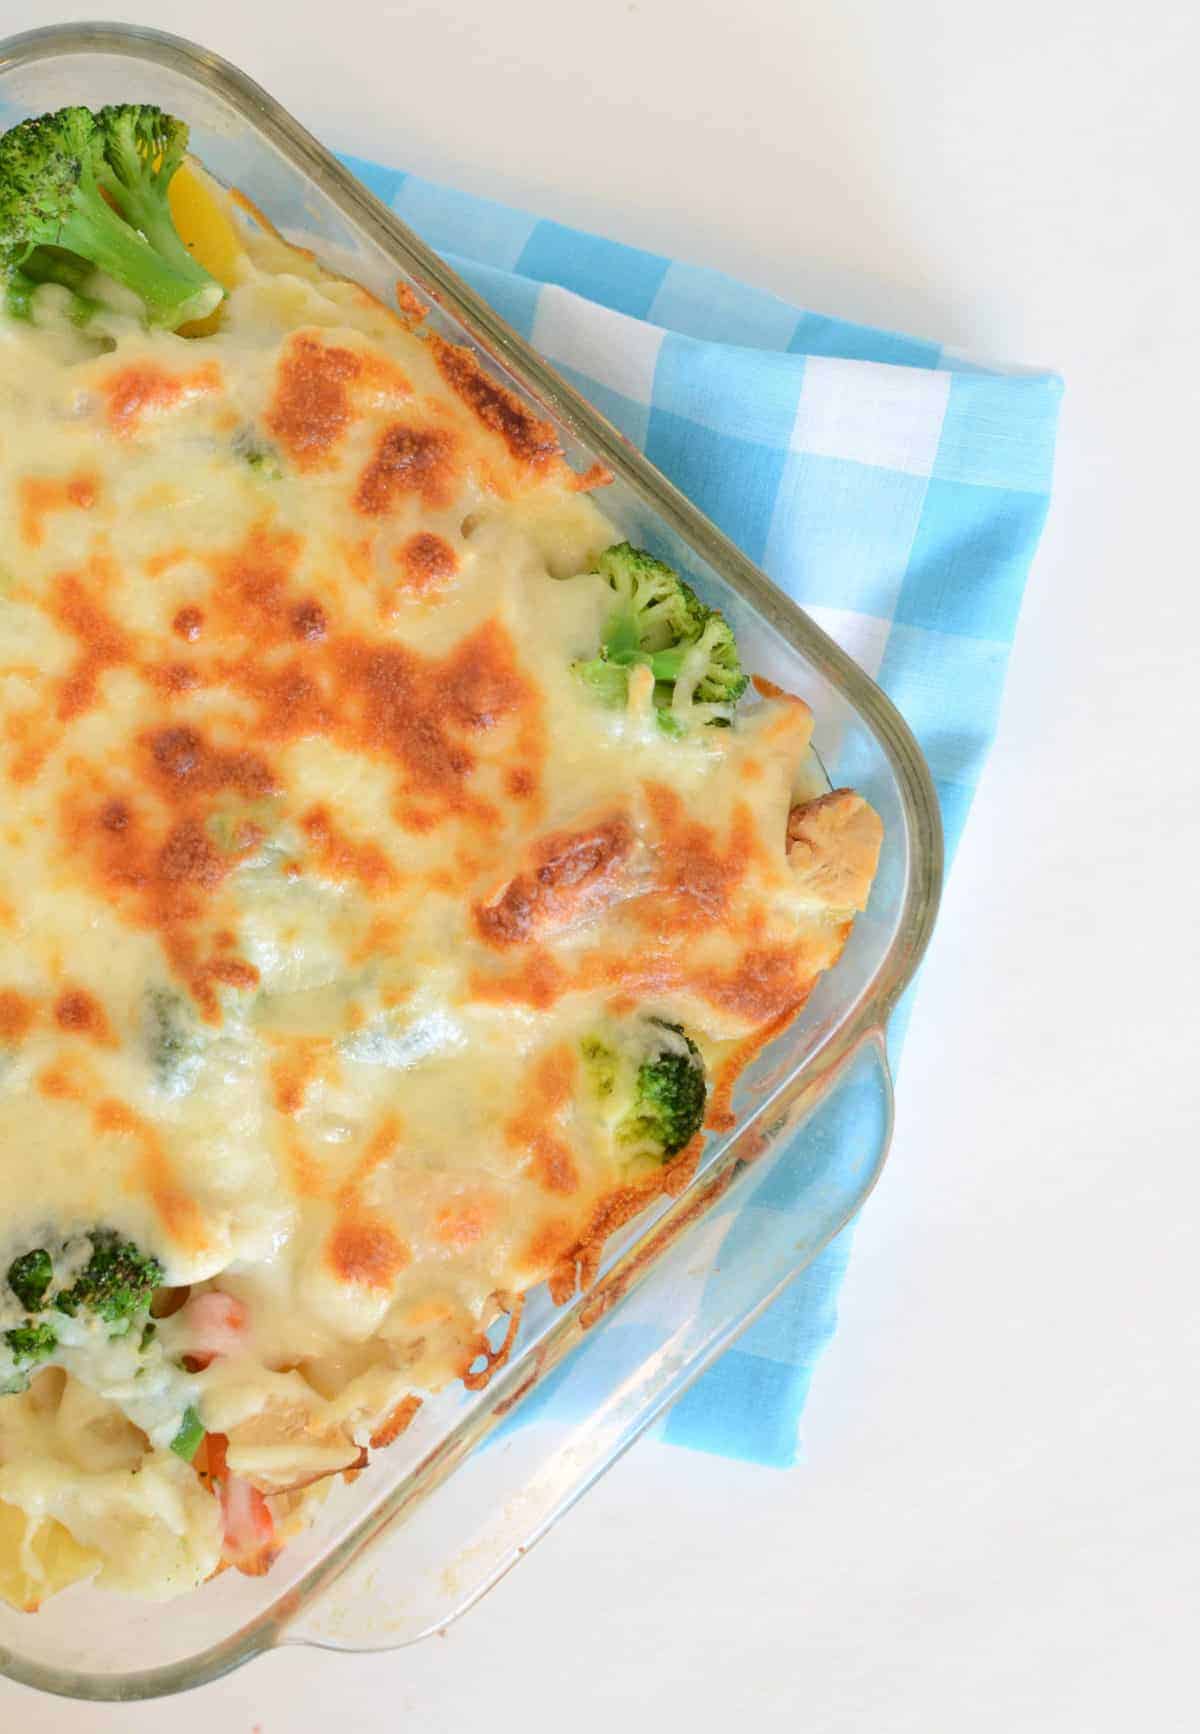 Creamy Chicken and Vegetable Baked Pasta